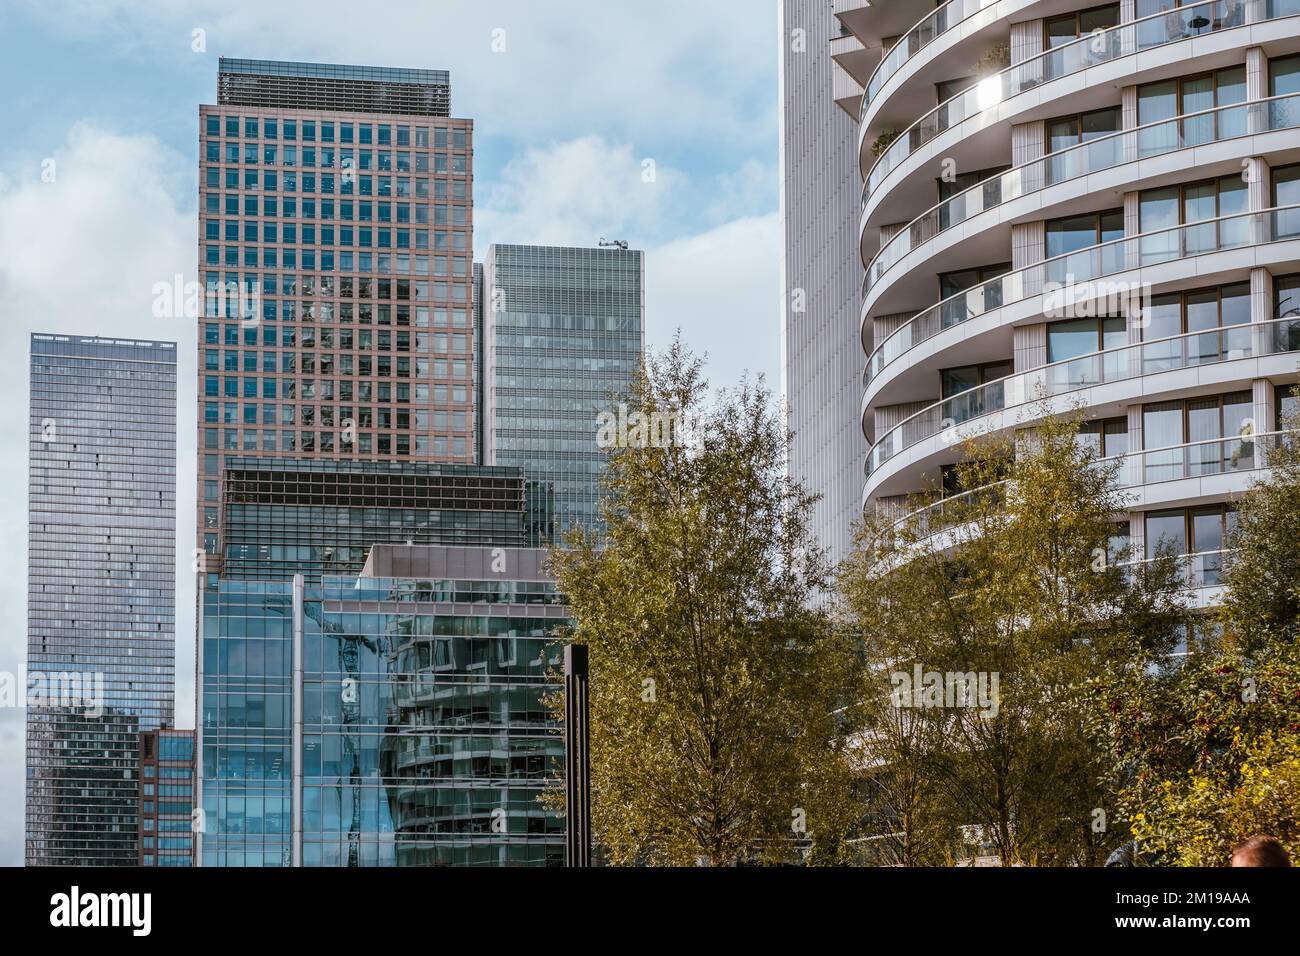 Detail of high-rise buildings at Harbour Quay Gardens, Wood Wharf, with reflections in windows and trees with fall foliage, Canary Wharf, London Stock Photo